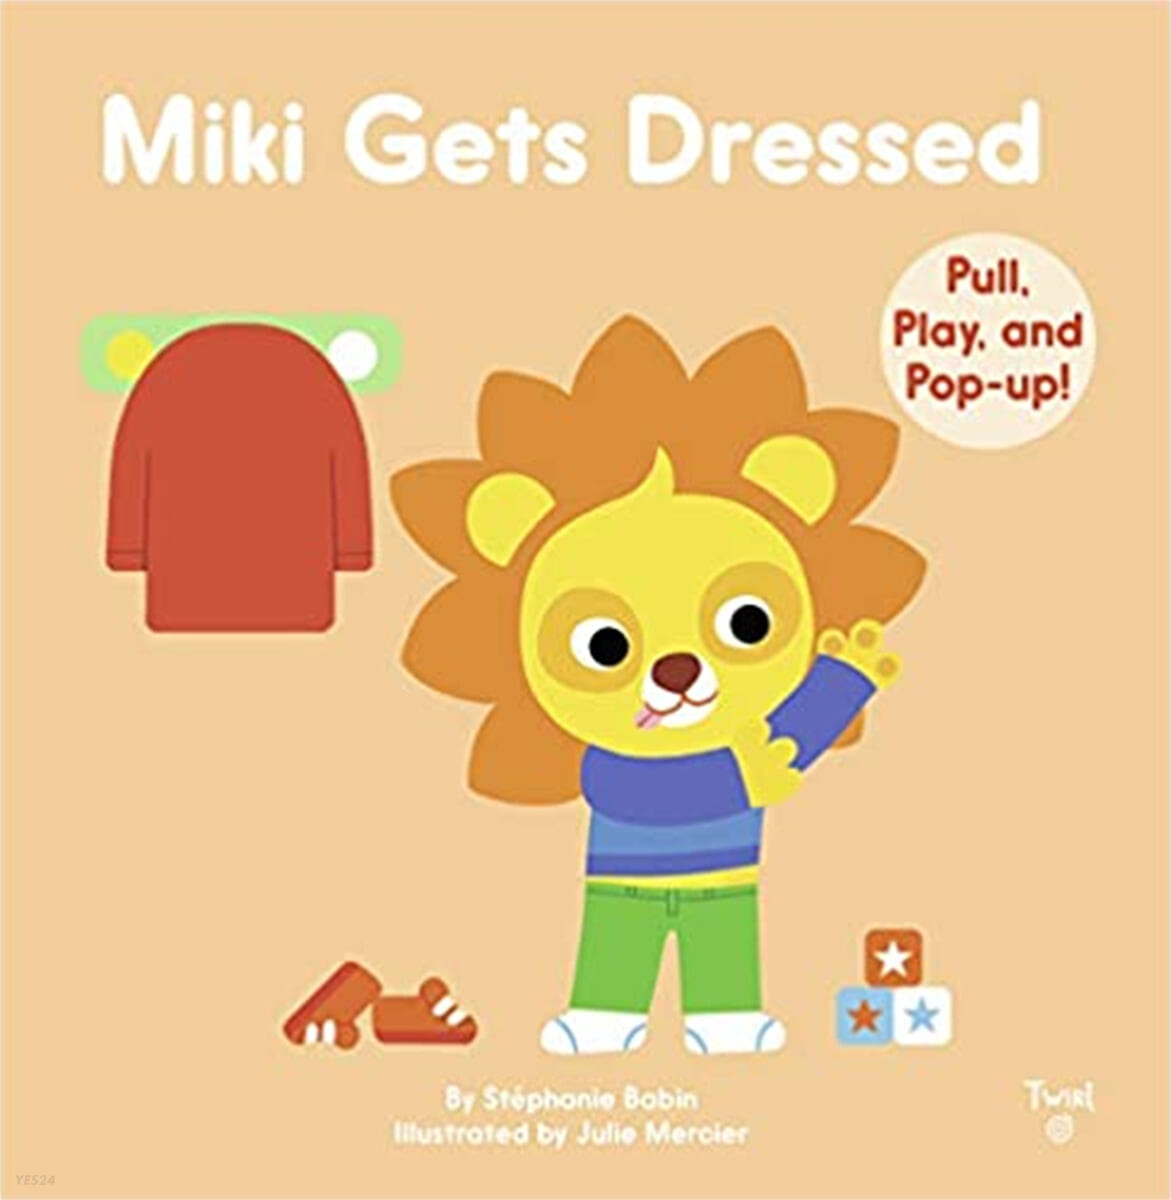 Miki gets dressed: pull, play, and pop-up!